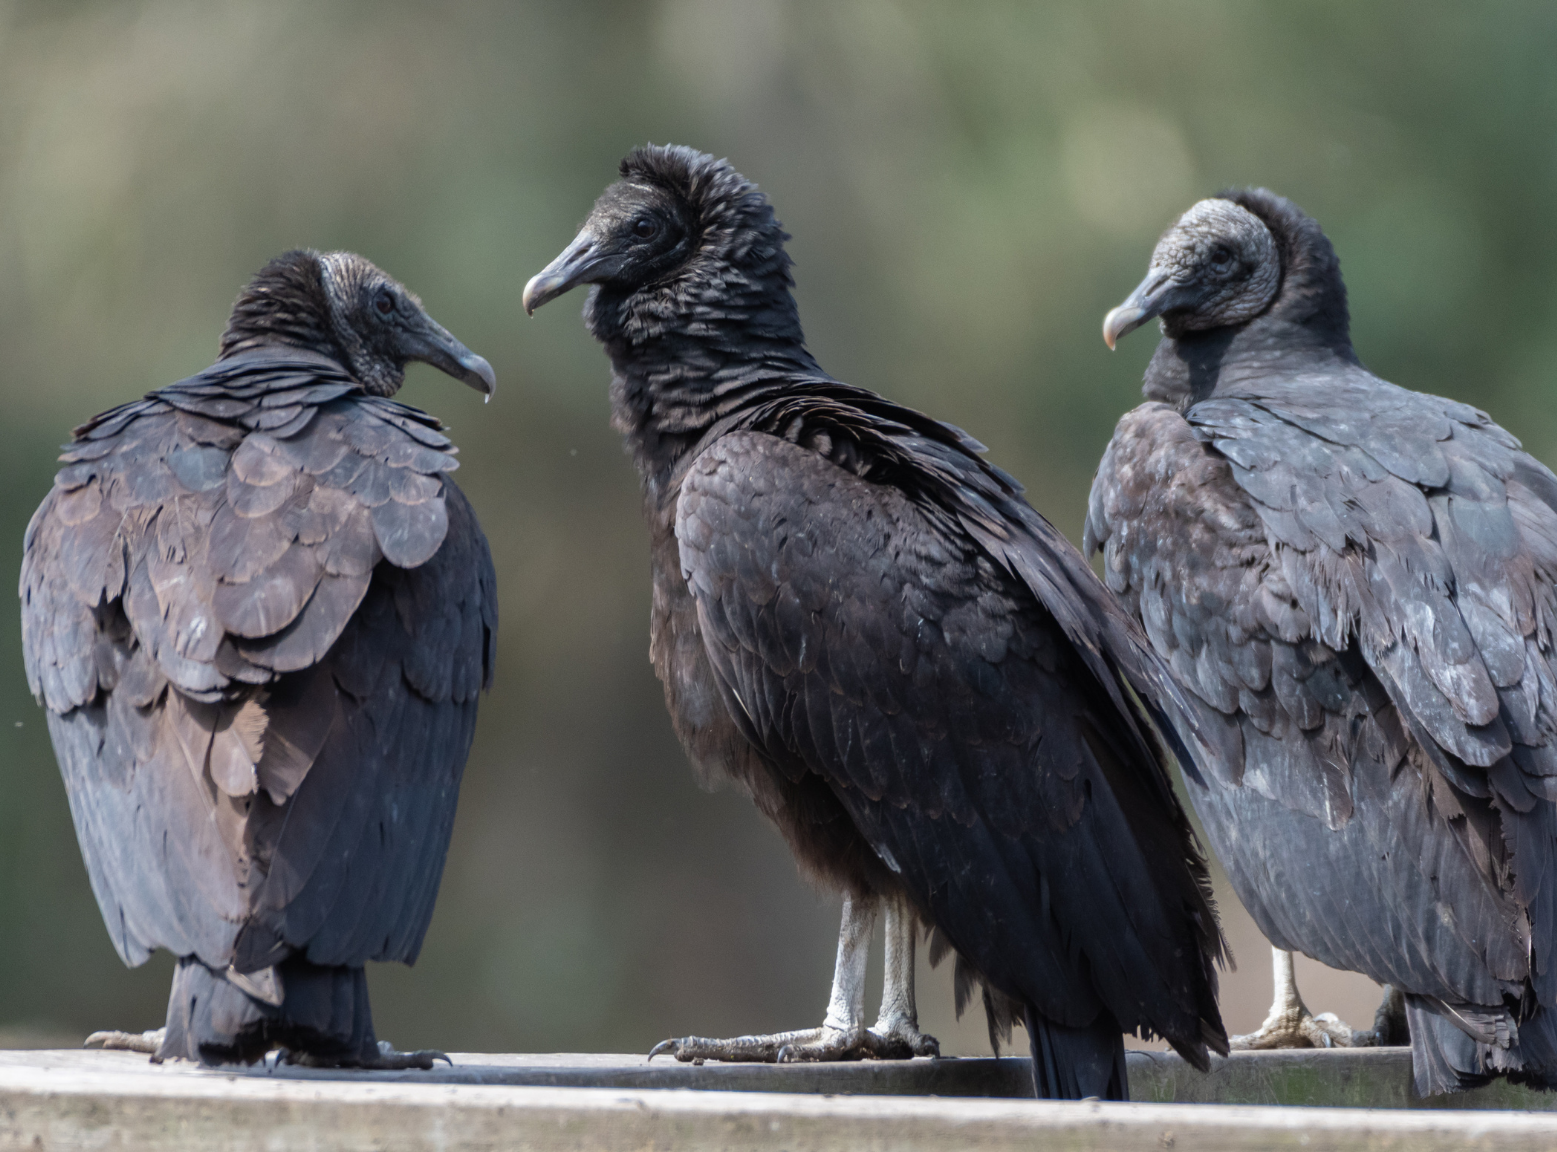 High Path Avian Influenza Confirmed In Black Vultures, Poultry